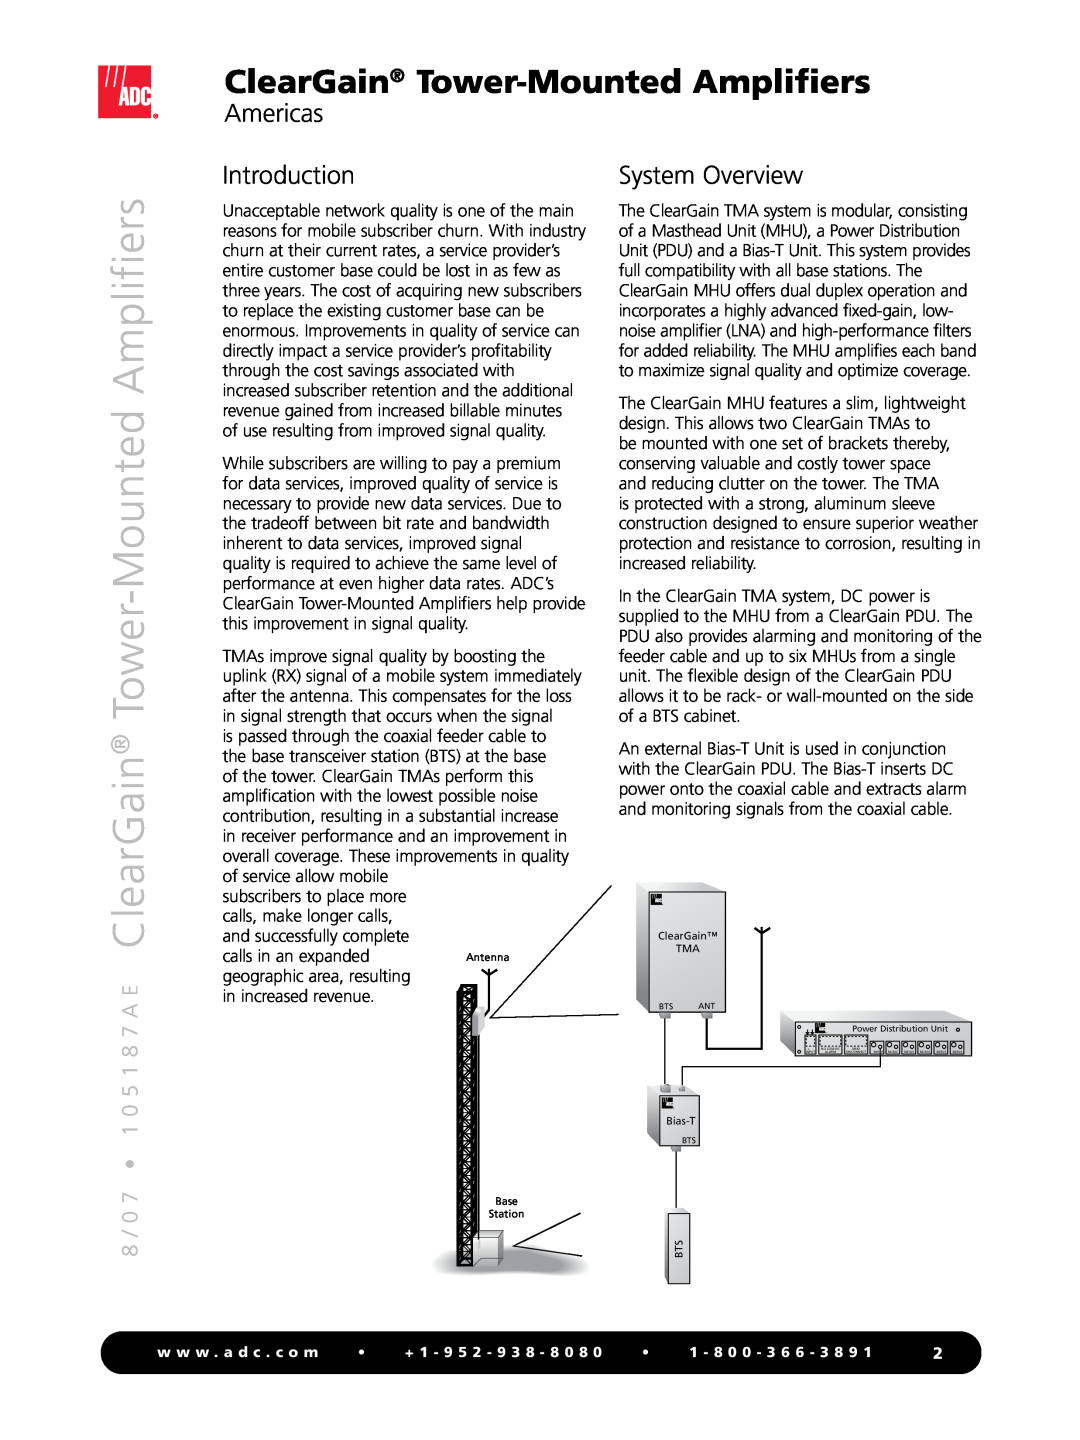 ADC Tower-Mounted Amplifiers manual ClearGain Tower-MountedAmplifiers, Introduction, System Overview, Americas 